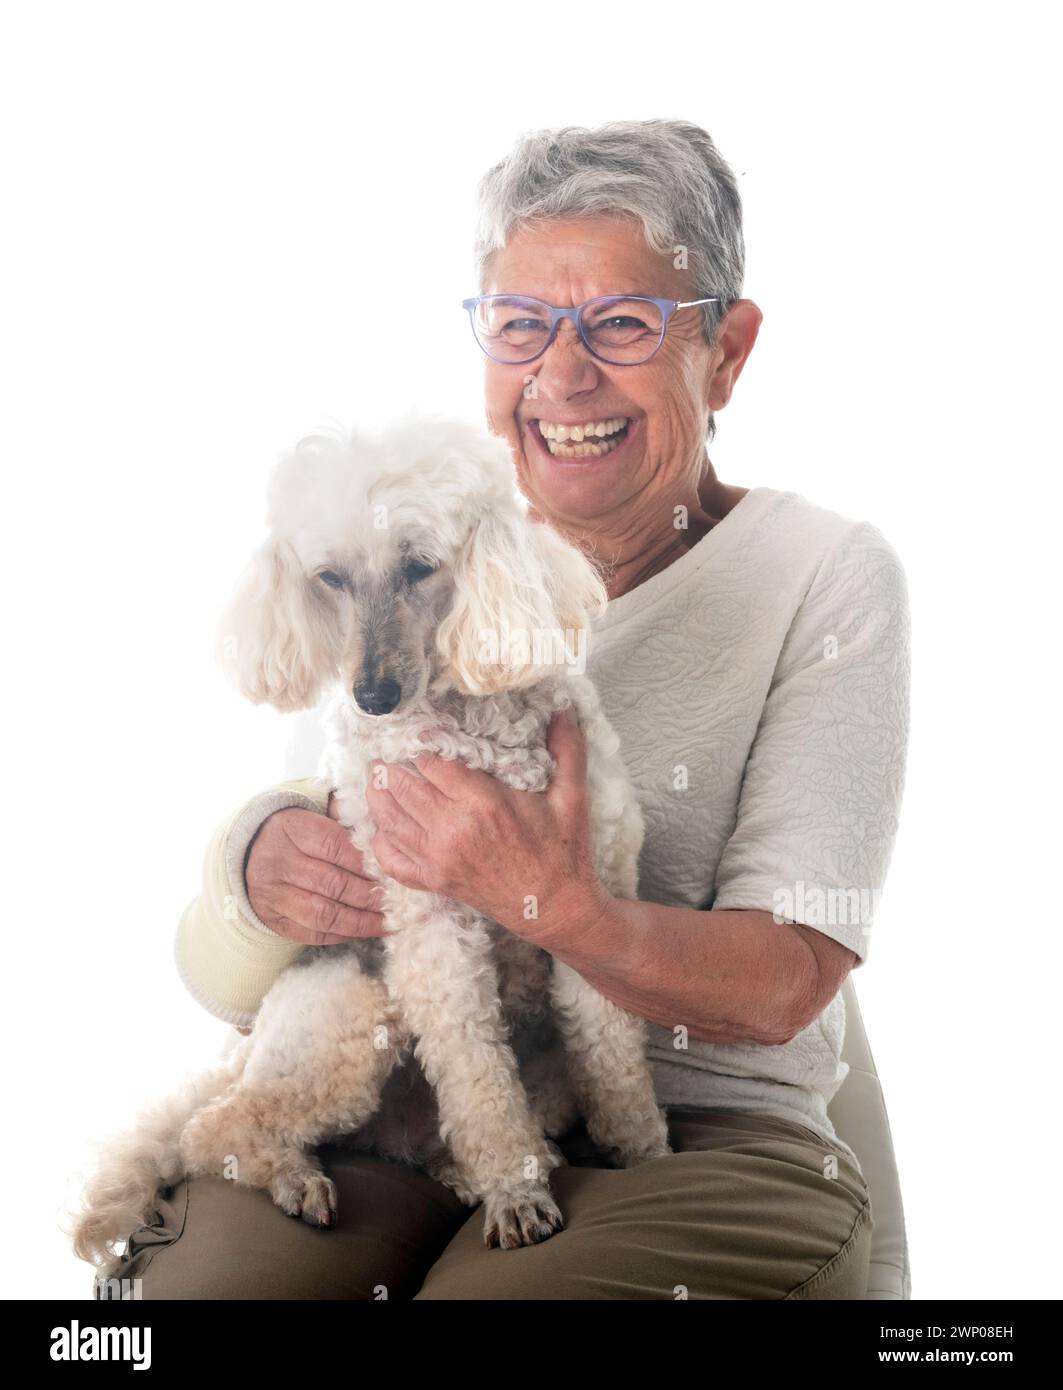 senior woman and dog in front of white background Stock Photo